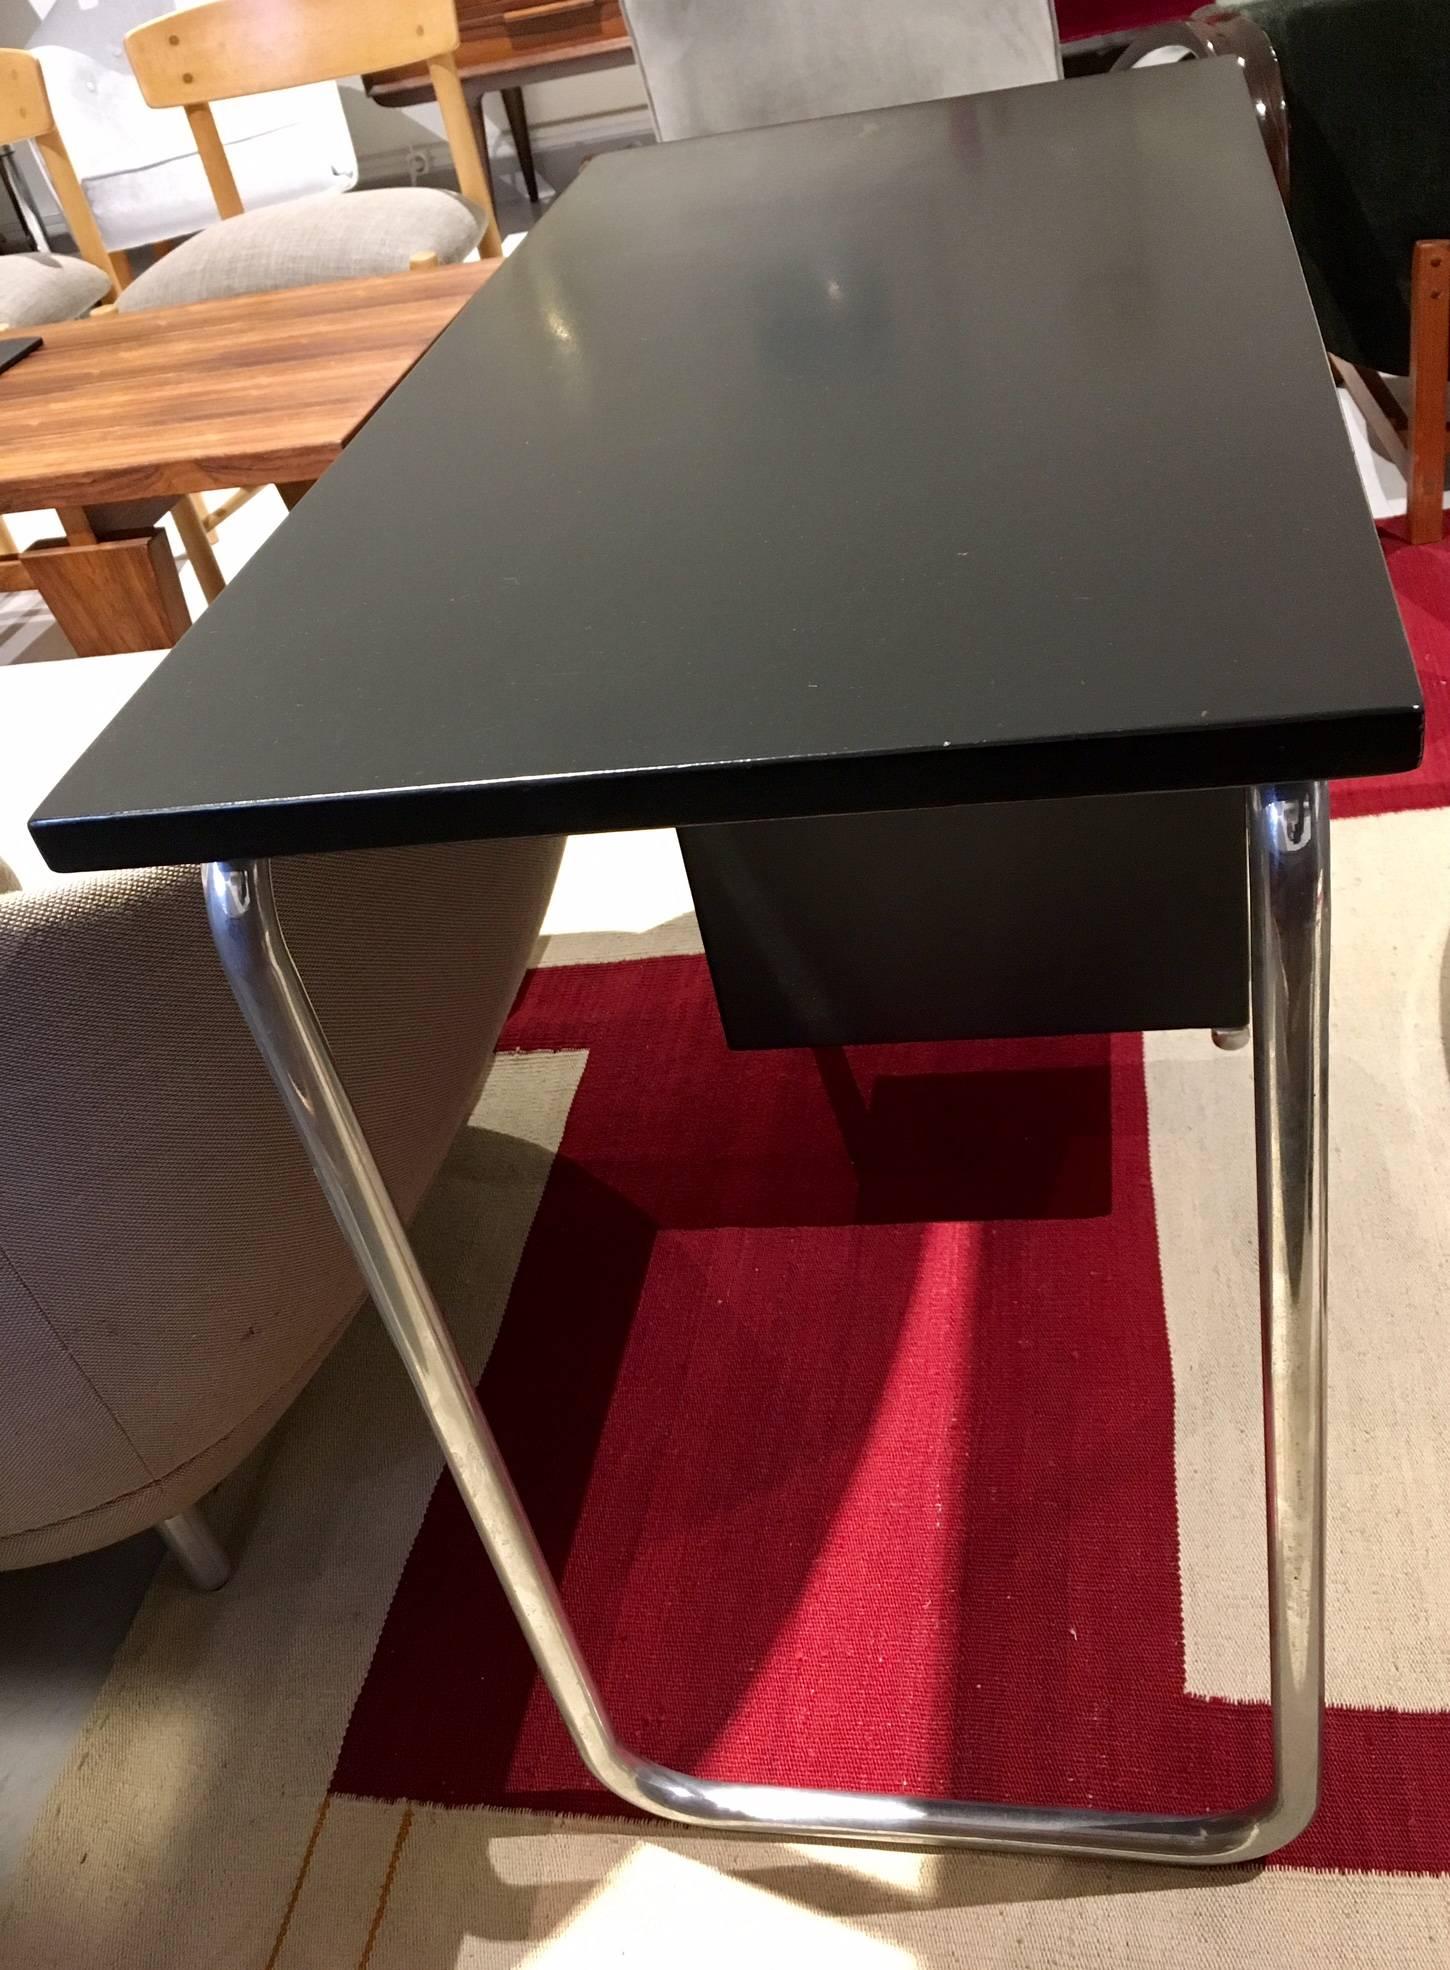 20th Century Black Lacquered Wood Desk with Tubular Steel Frame, circa 1935